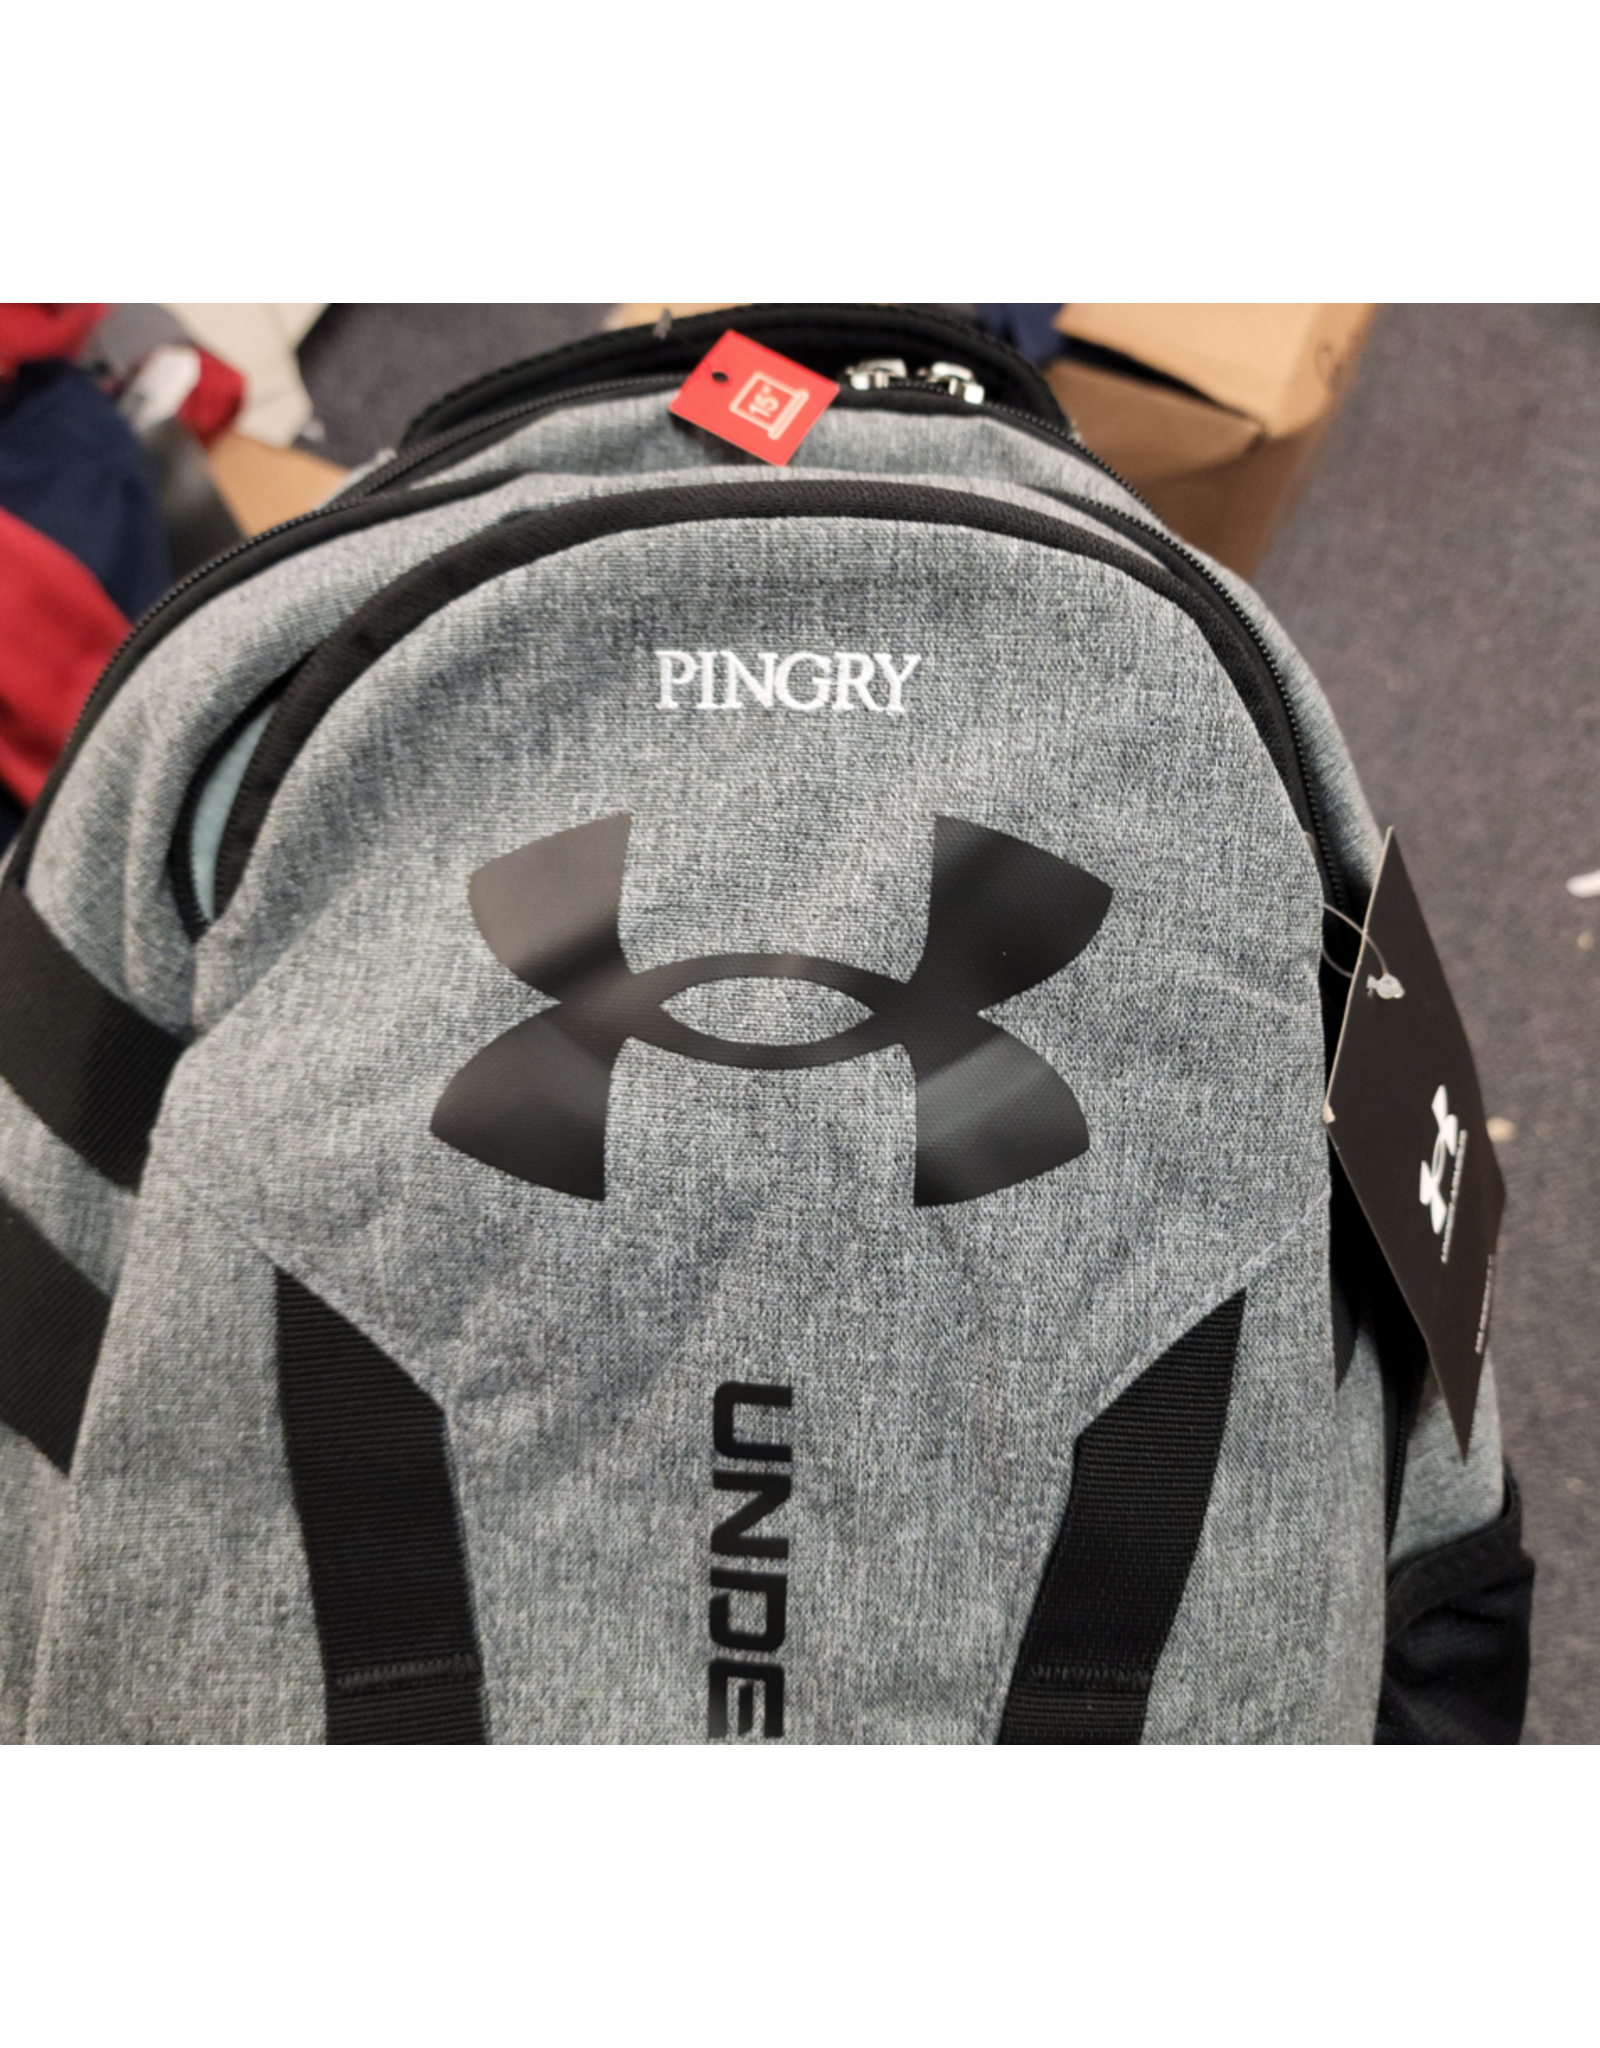 Under Armour Pingry Under Armour 5.0 Backpack, Gray